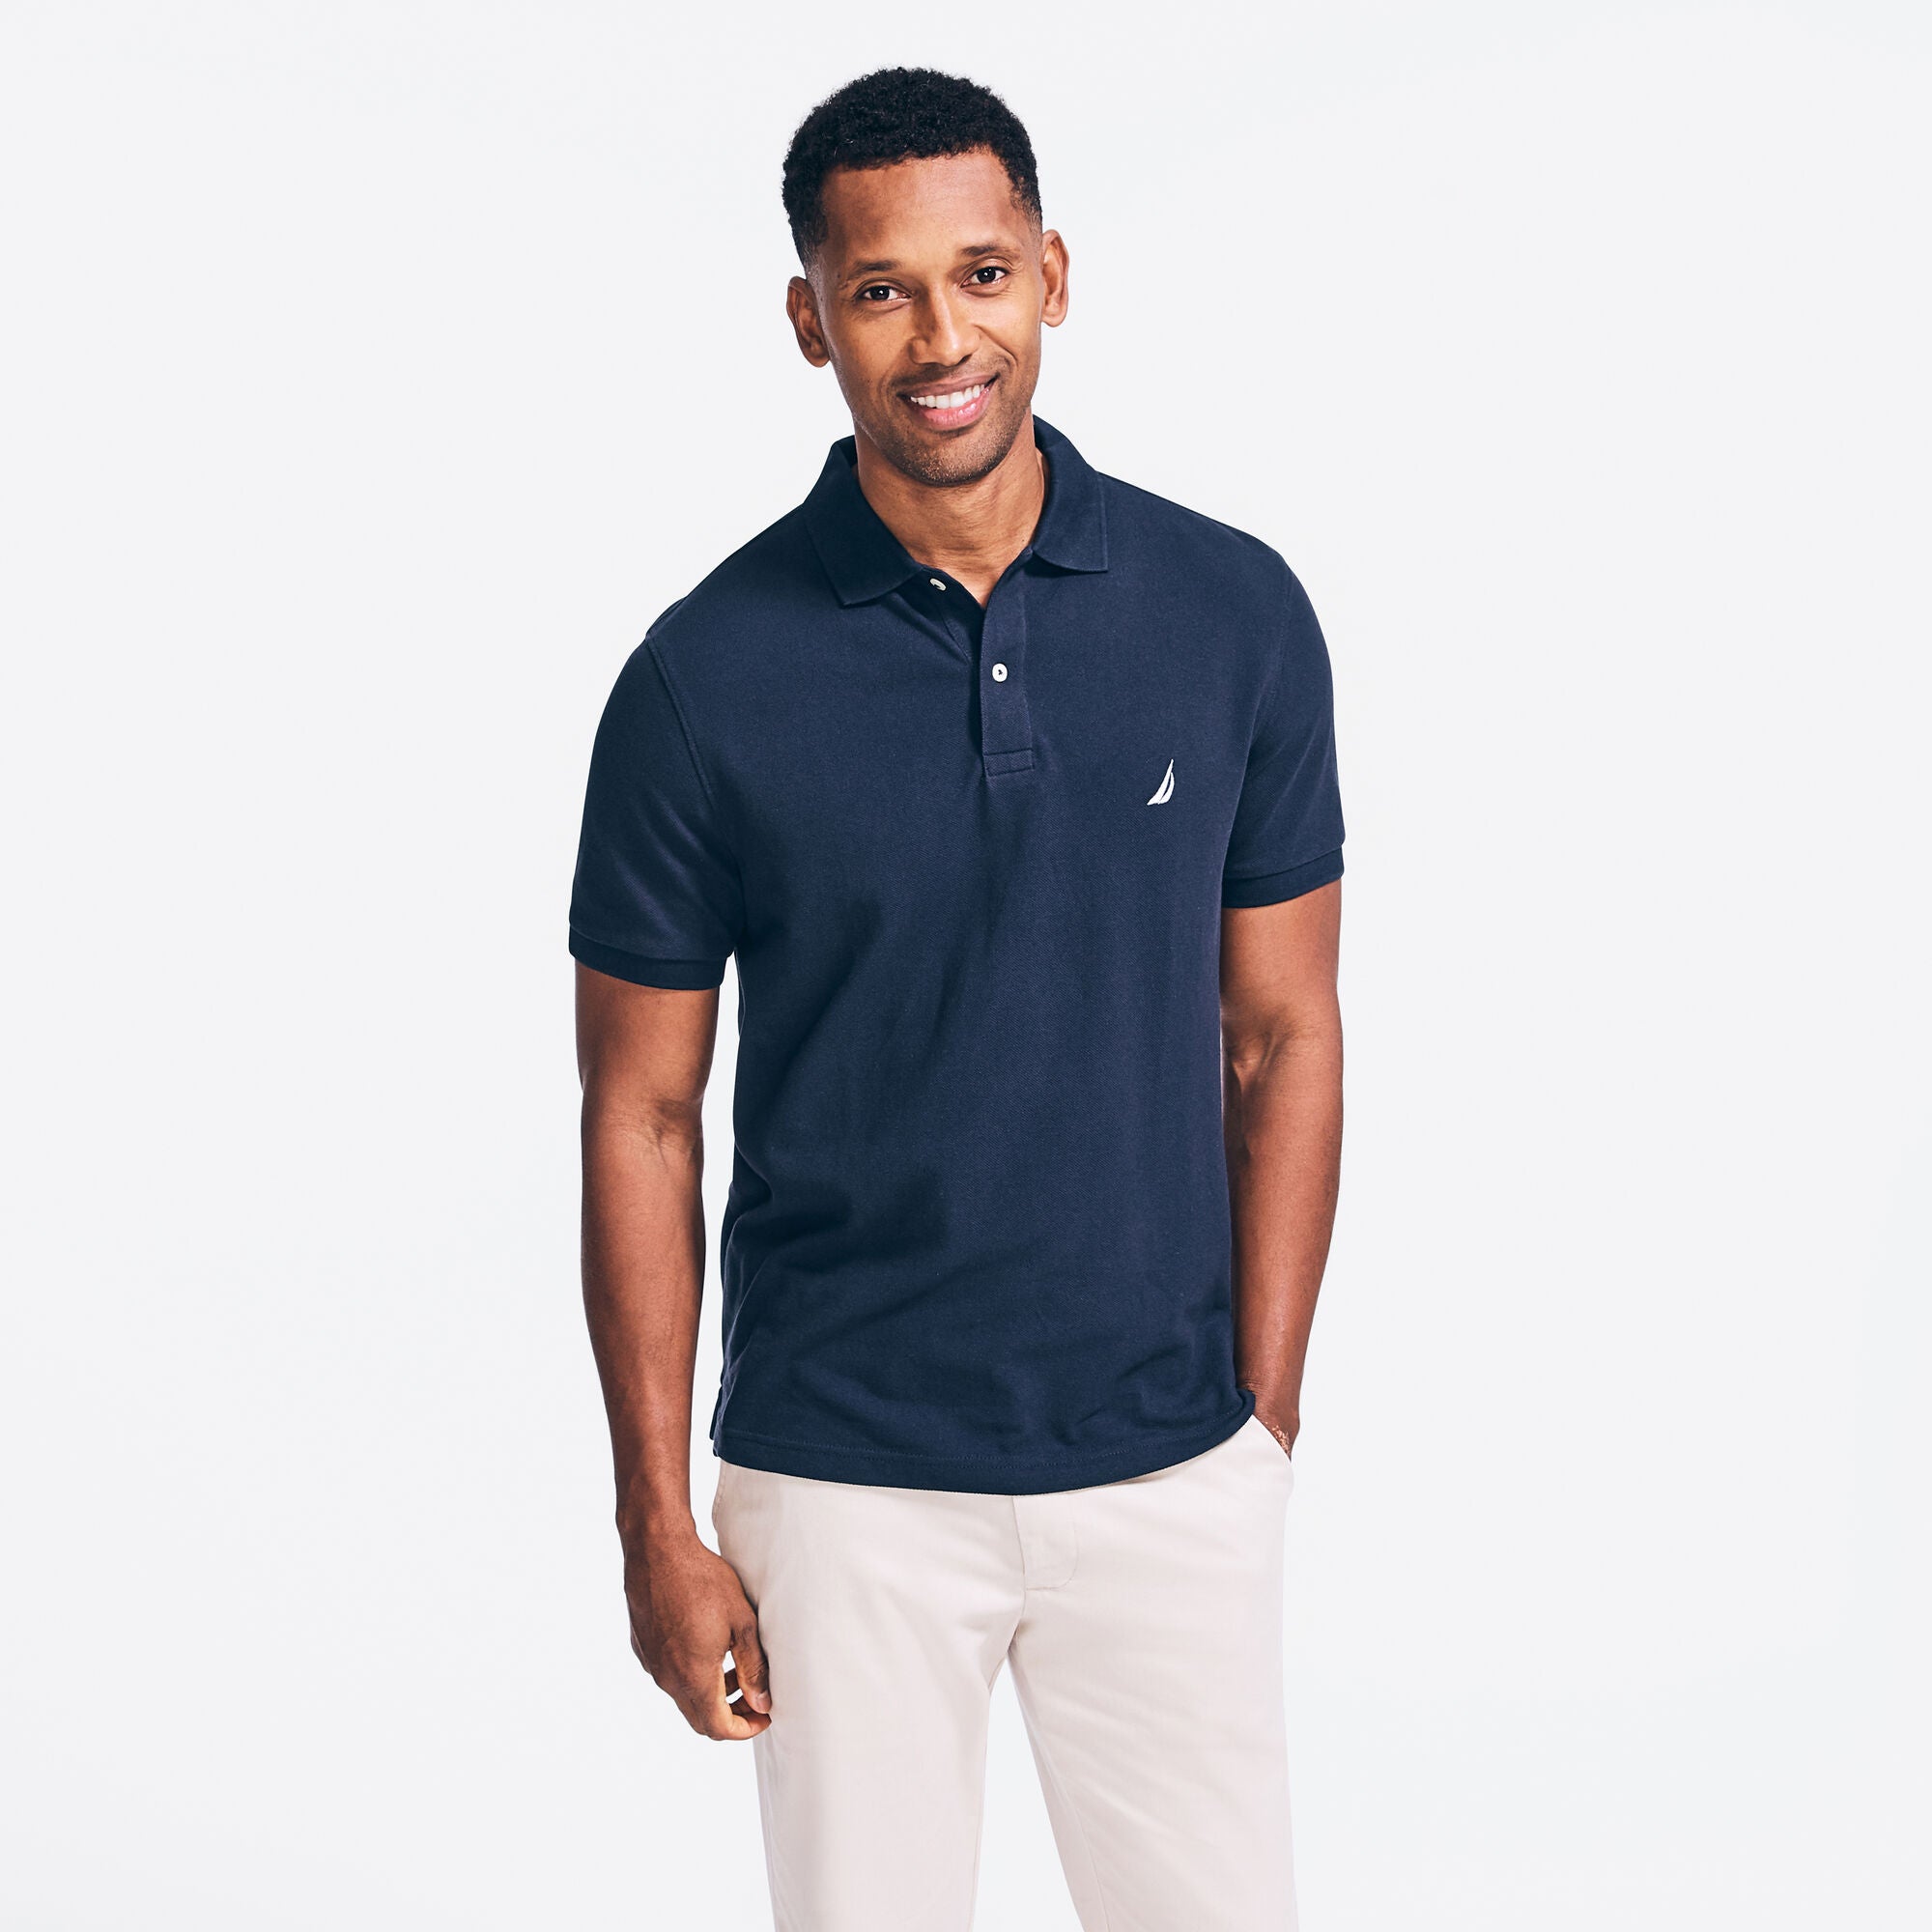 CLASSIC FIT DECK POLO -  PACK OF 3 - NAVY,BLACK,BLACK ALL SIZE XXL